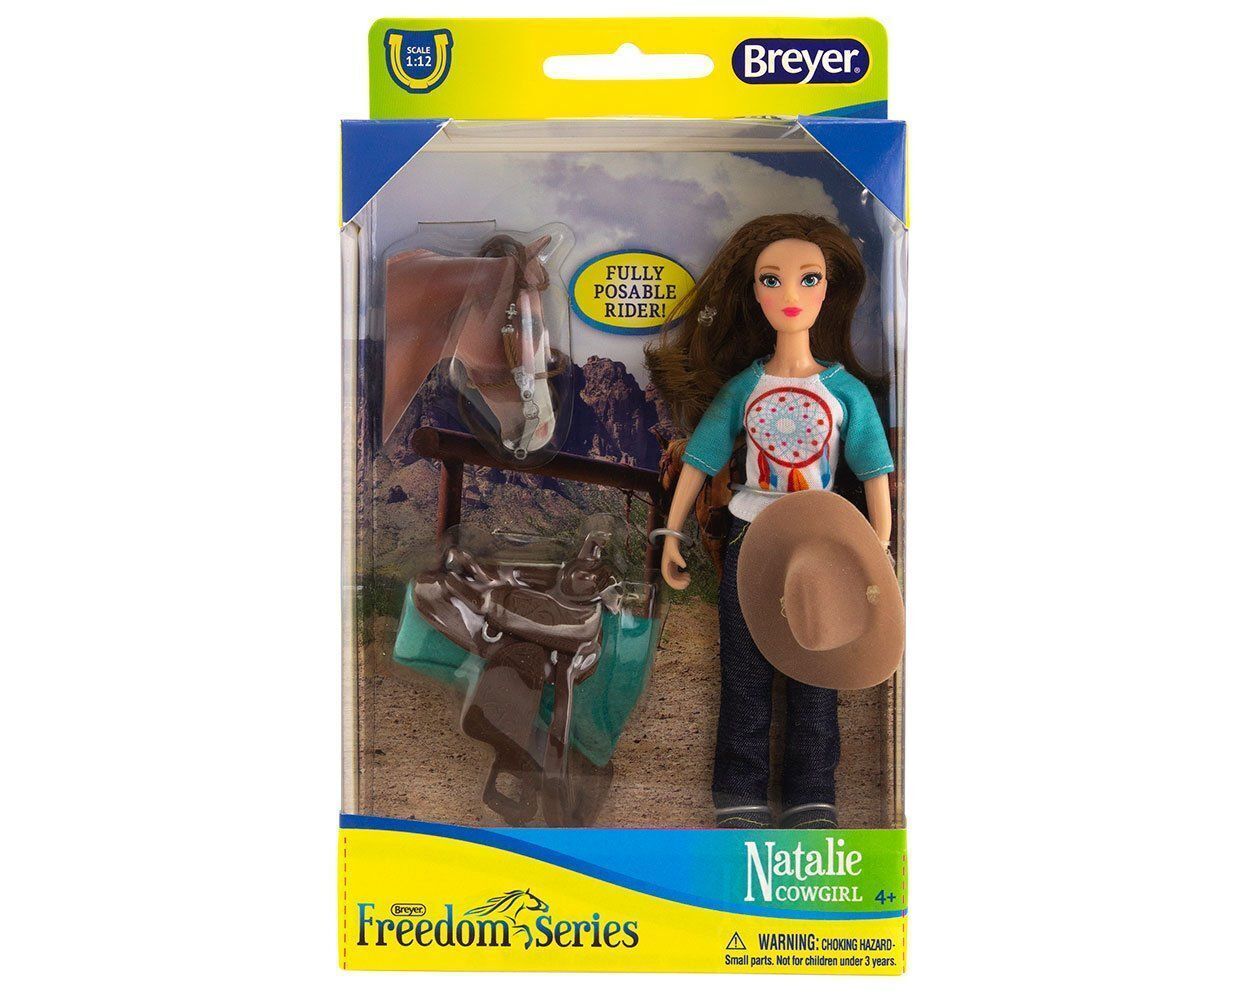 Breyer #62025 Natalie Cowgirl - New Factory Sealed